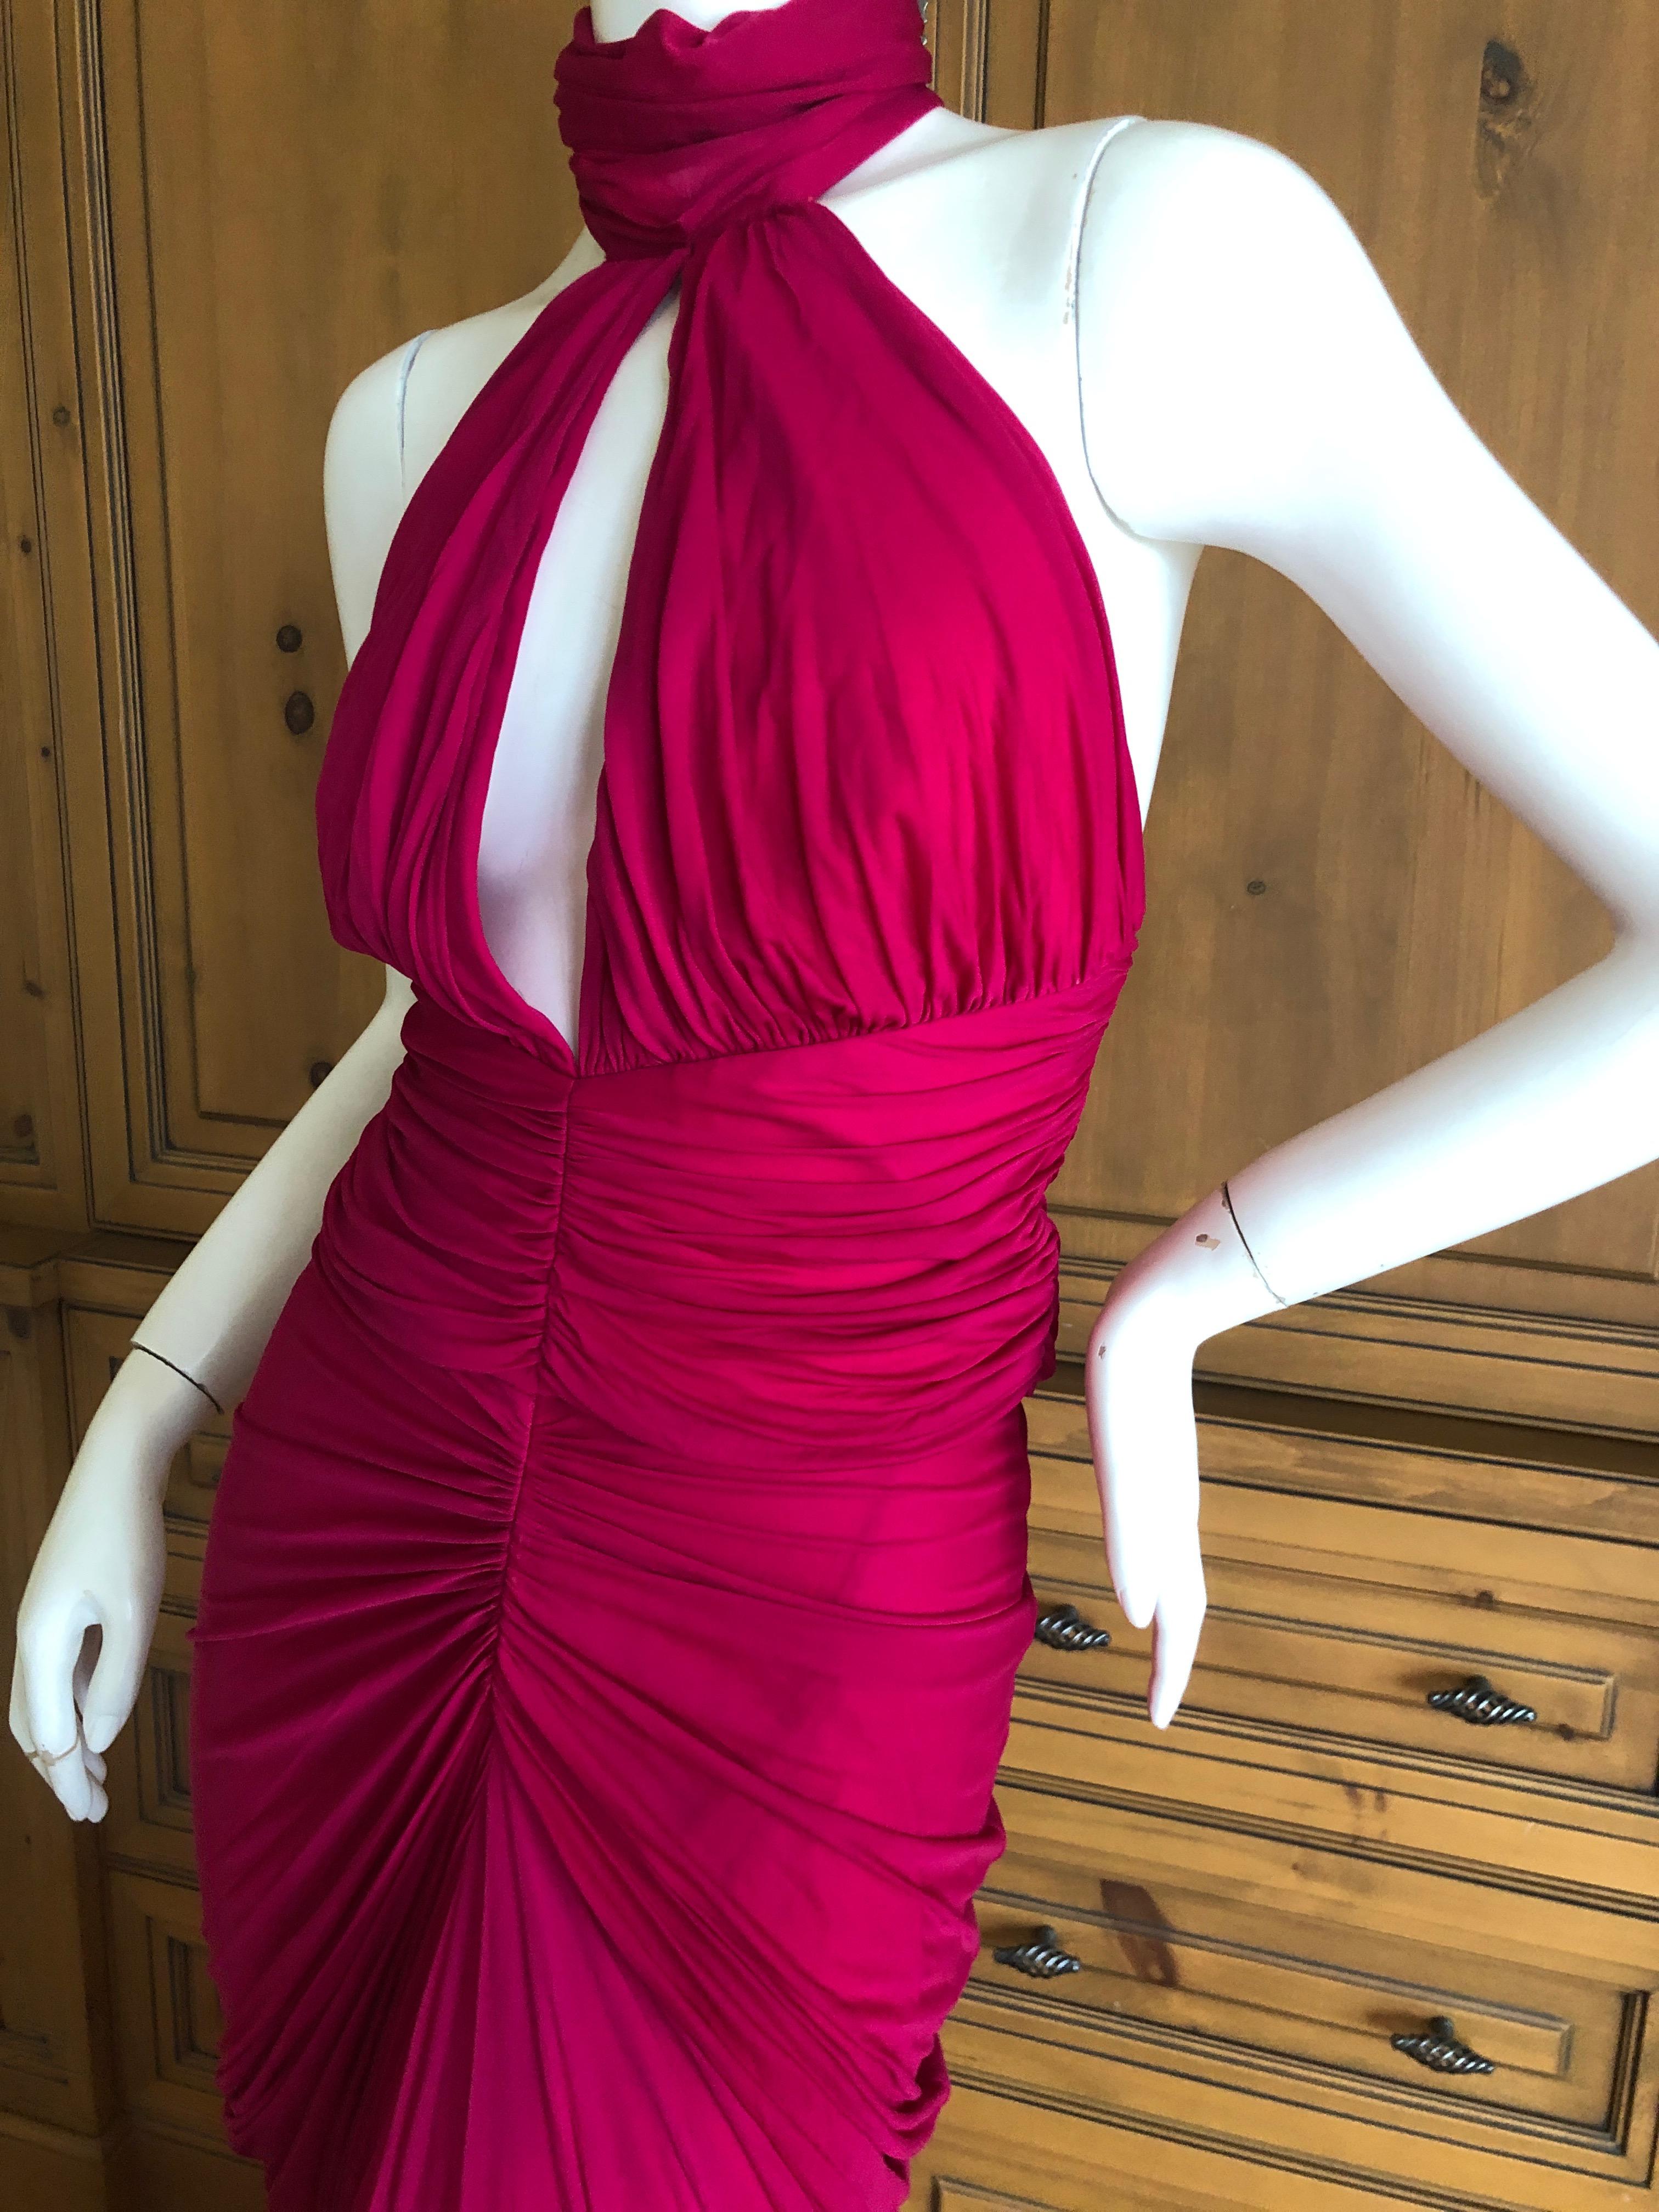 Alexander McQueen Vintage Keyhole Halter Style Evening Dress w Fishtail Train In Excellent Condition For Sale In Cloverdale, CA